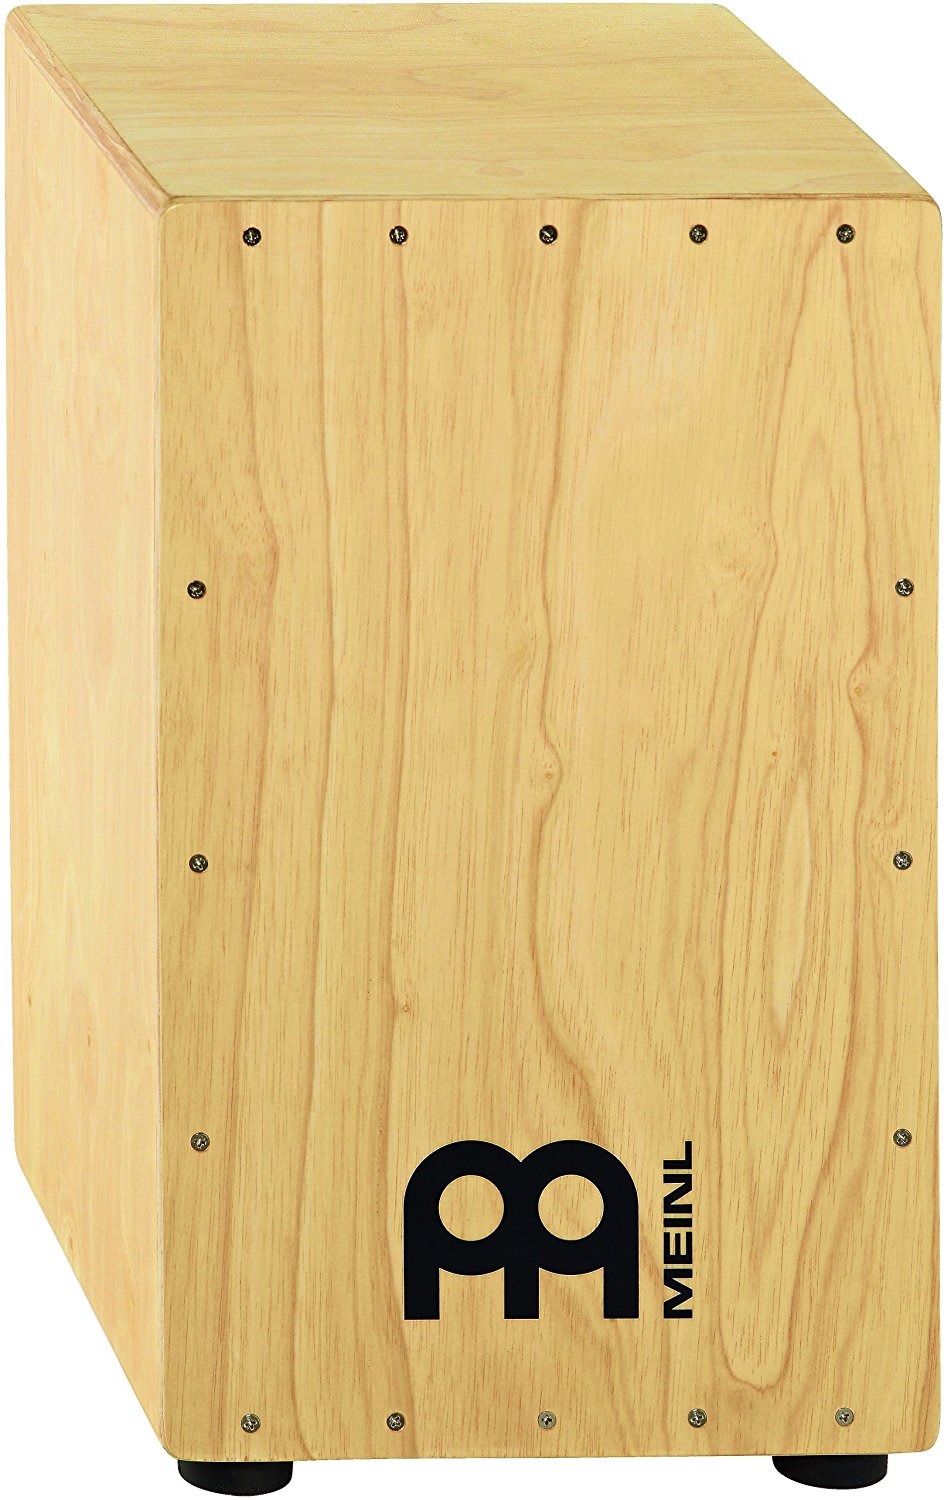 Meinl Headliner Series Wood String Cajon for Adjustable Snare Effect, Large Size